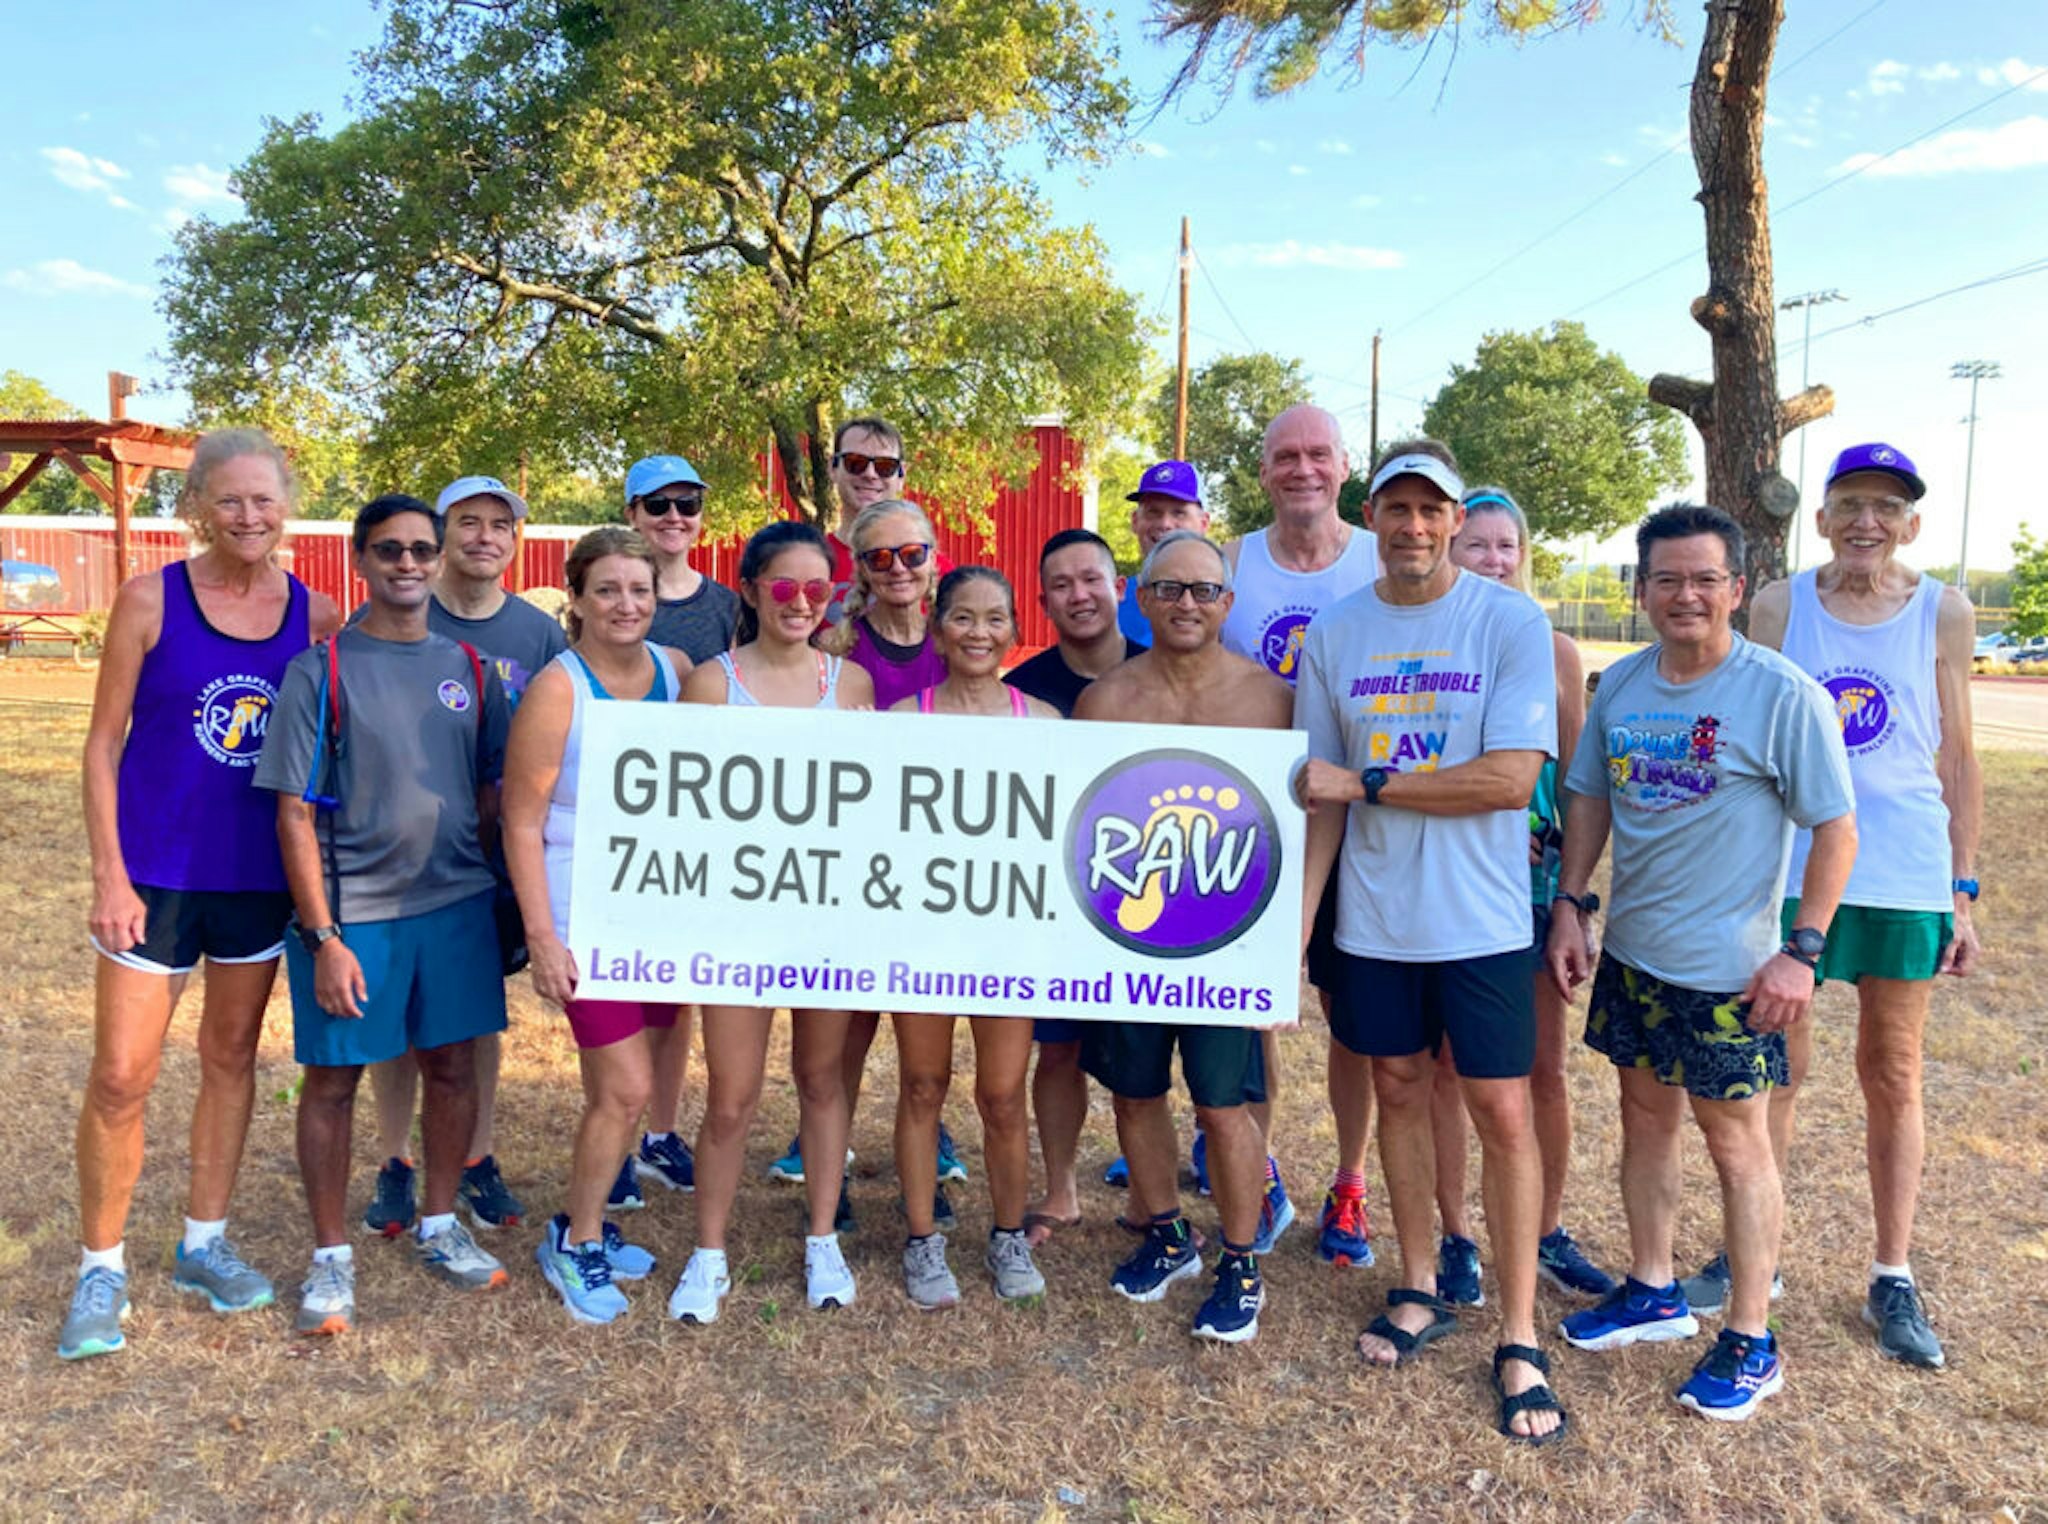 Lake Grapevine Runners and Walkers